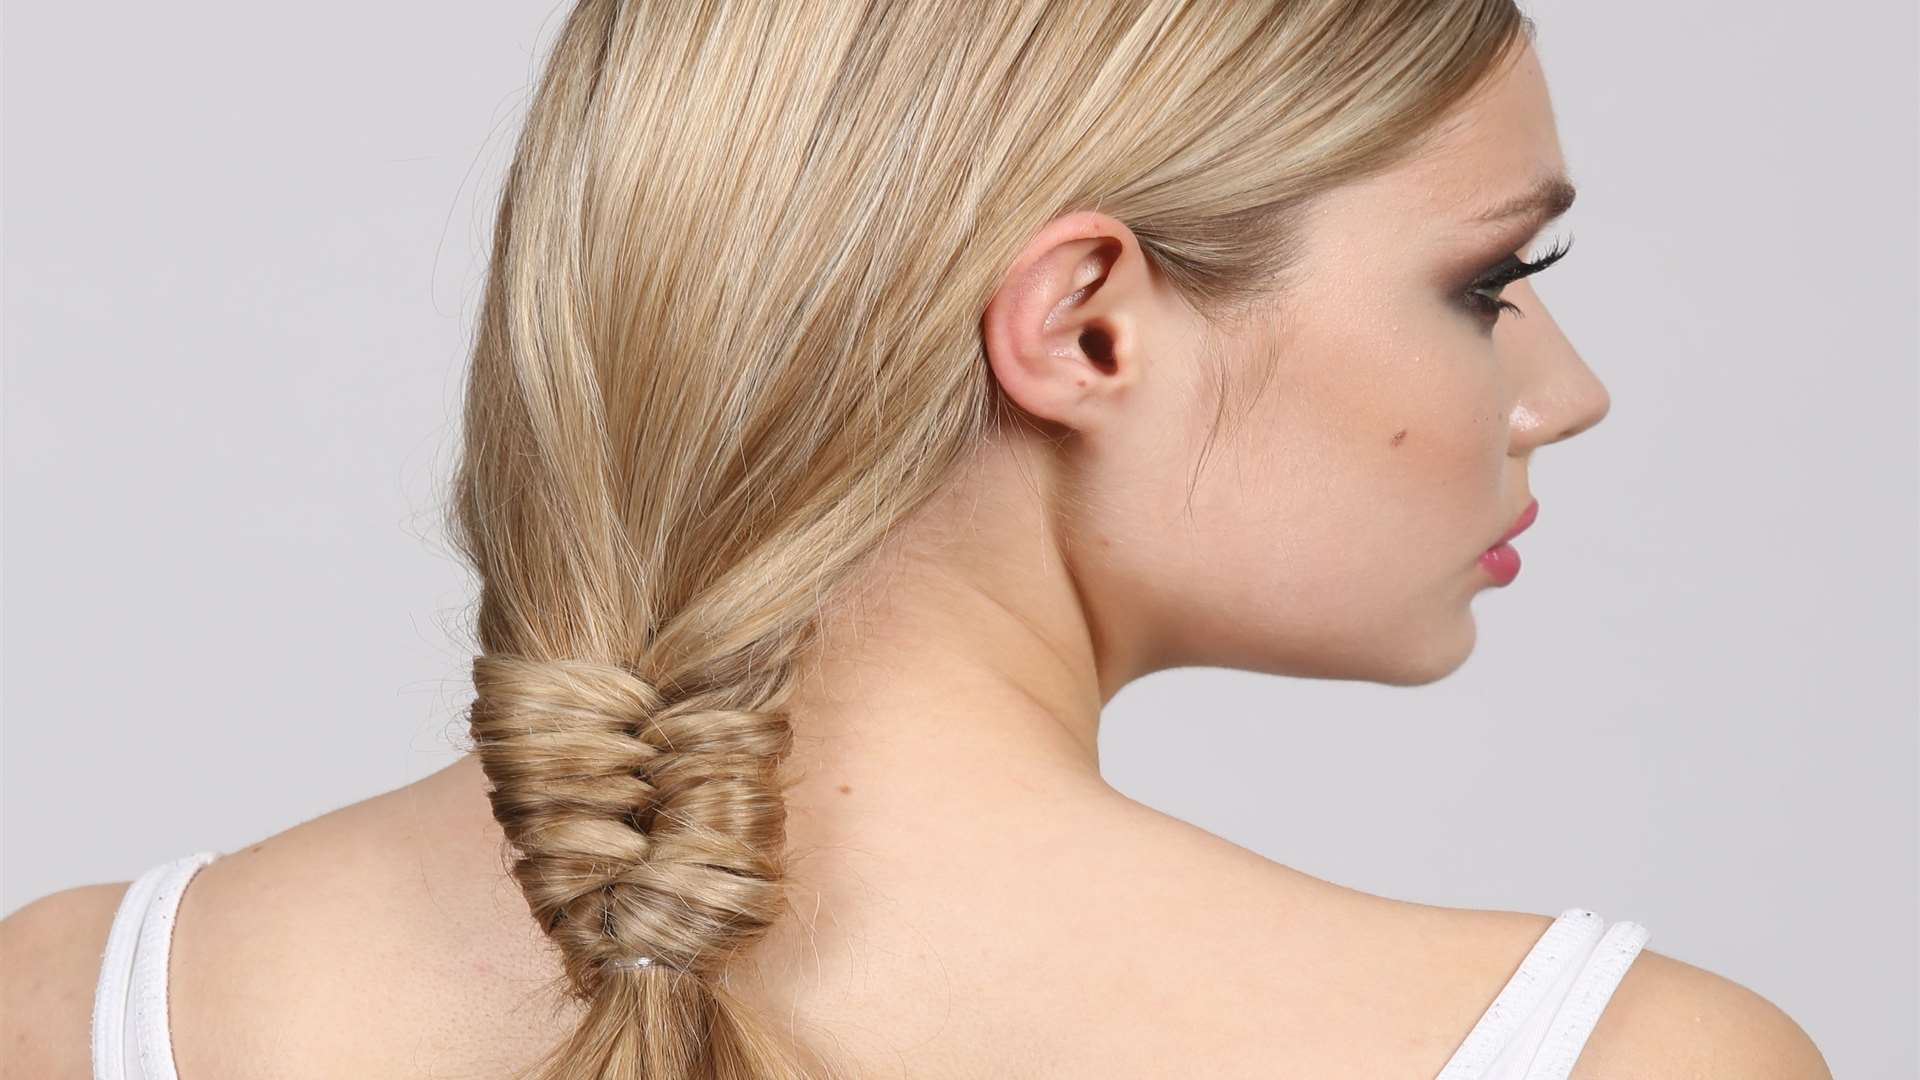 The figure of eight braid